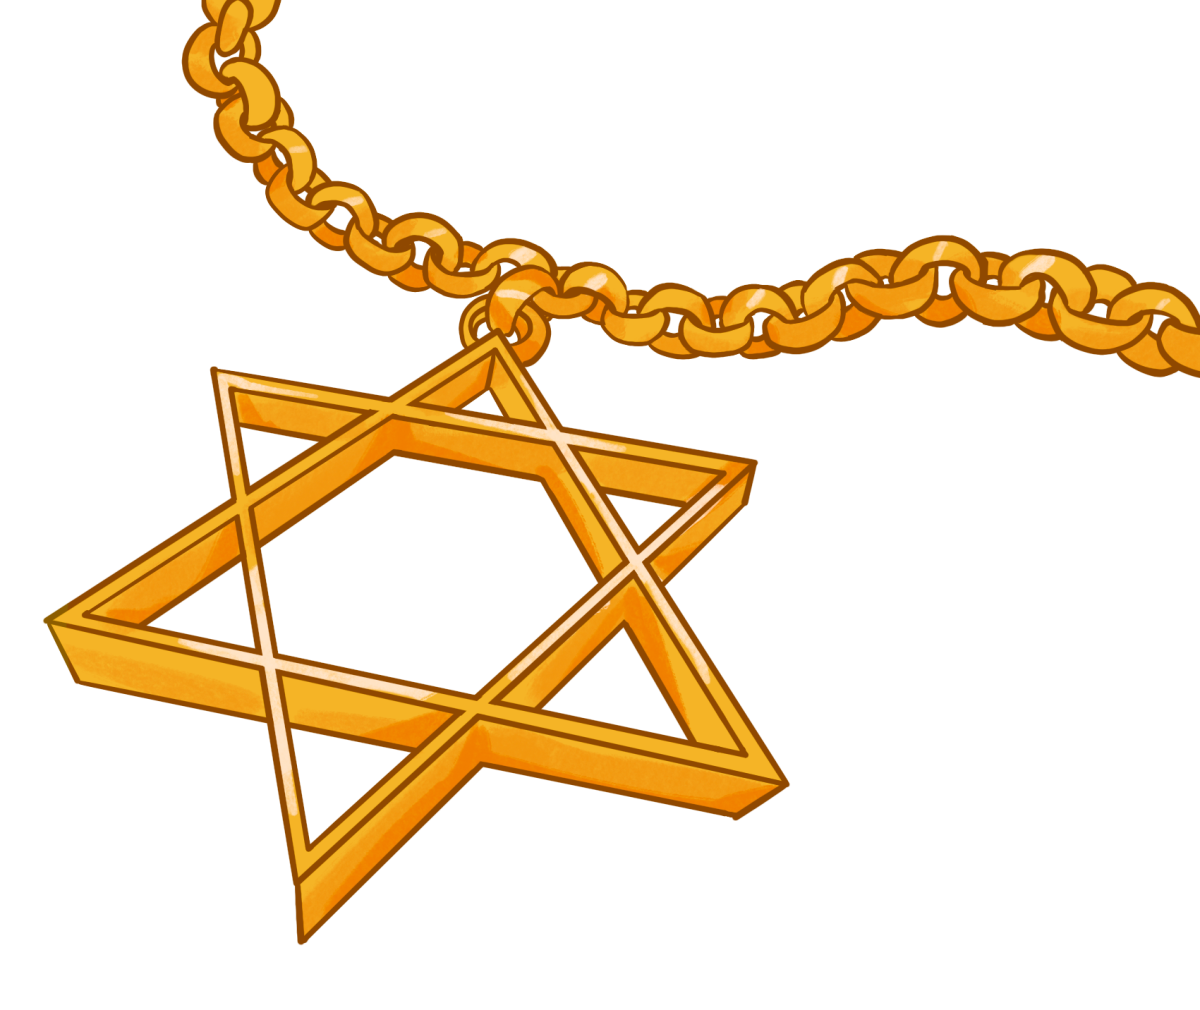 The Star of David on a golden necklace.